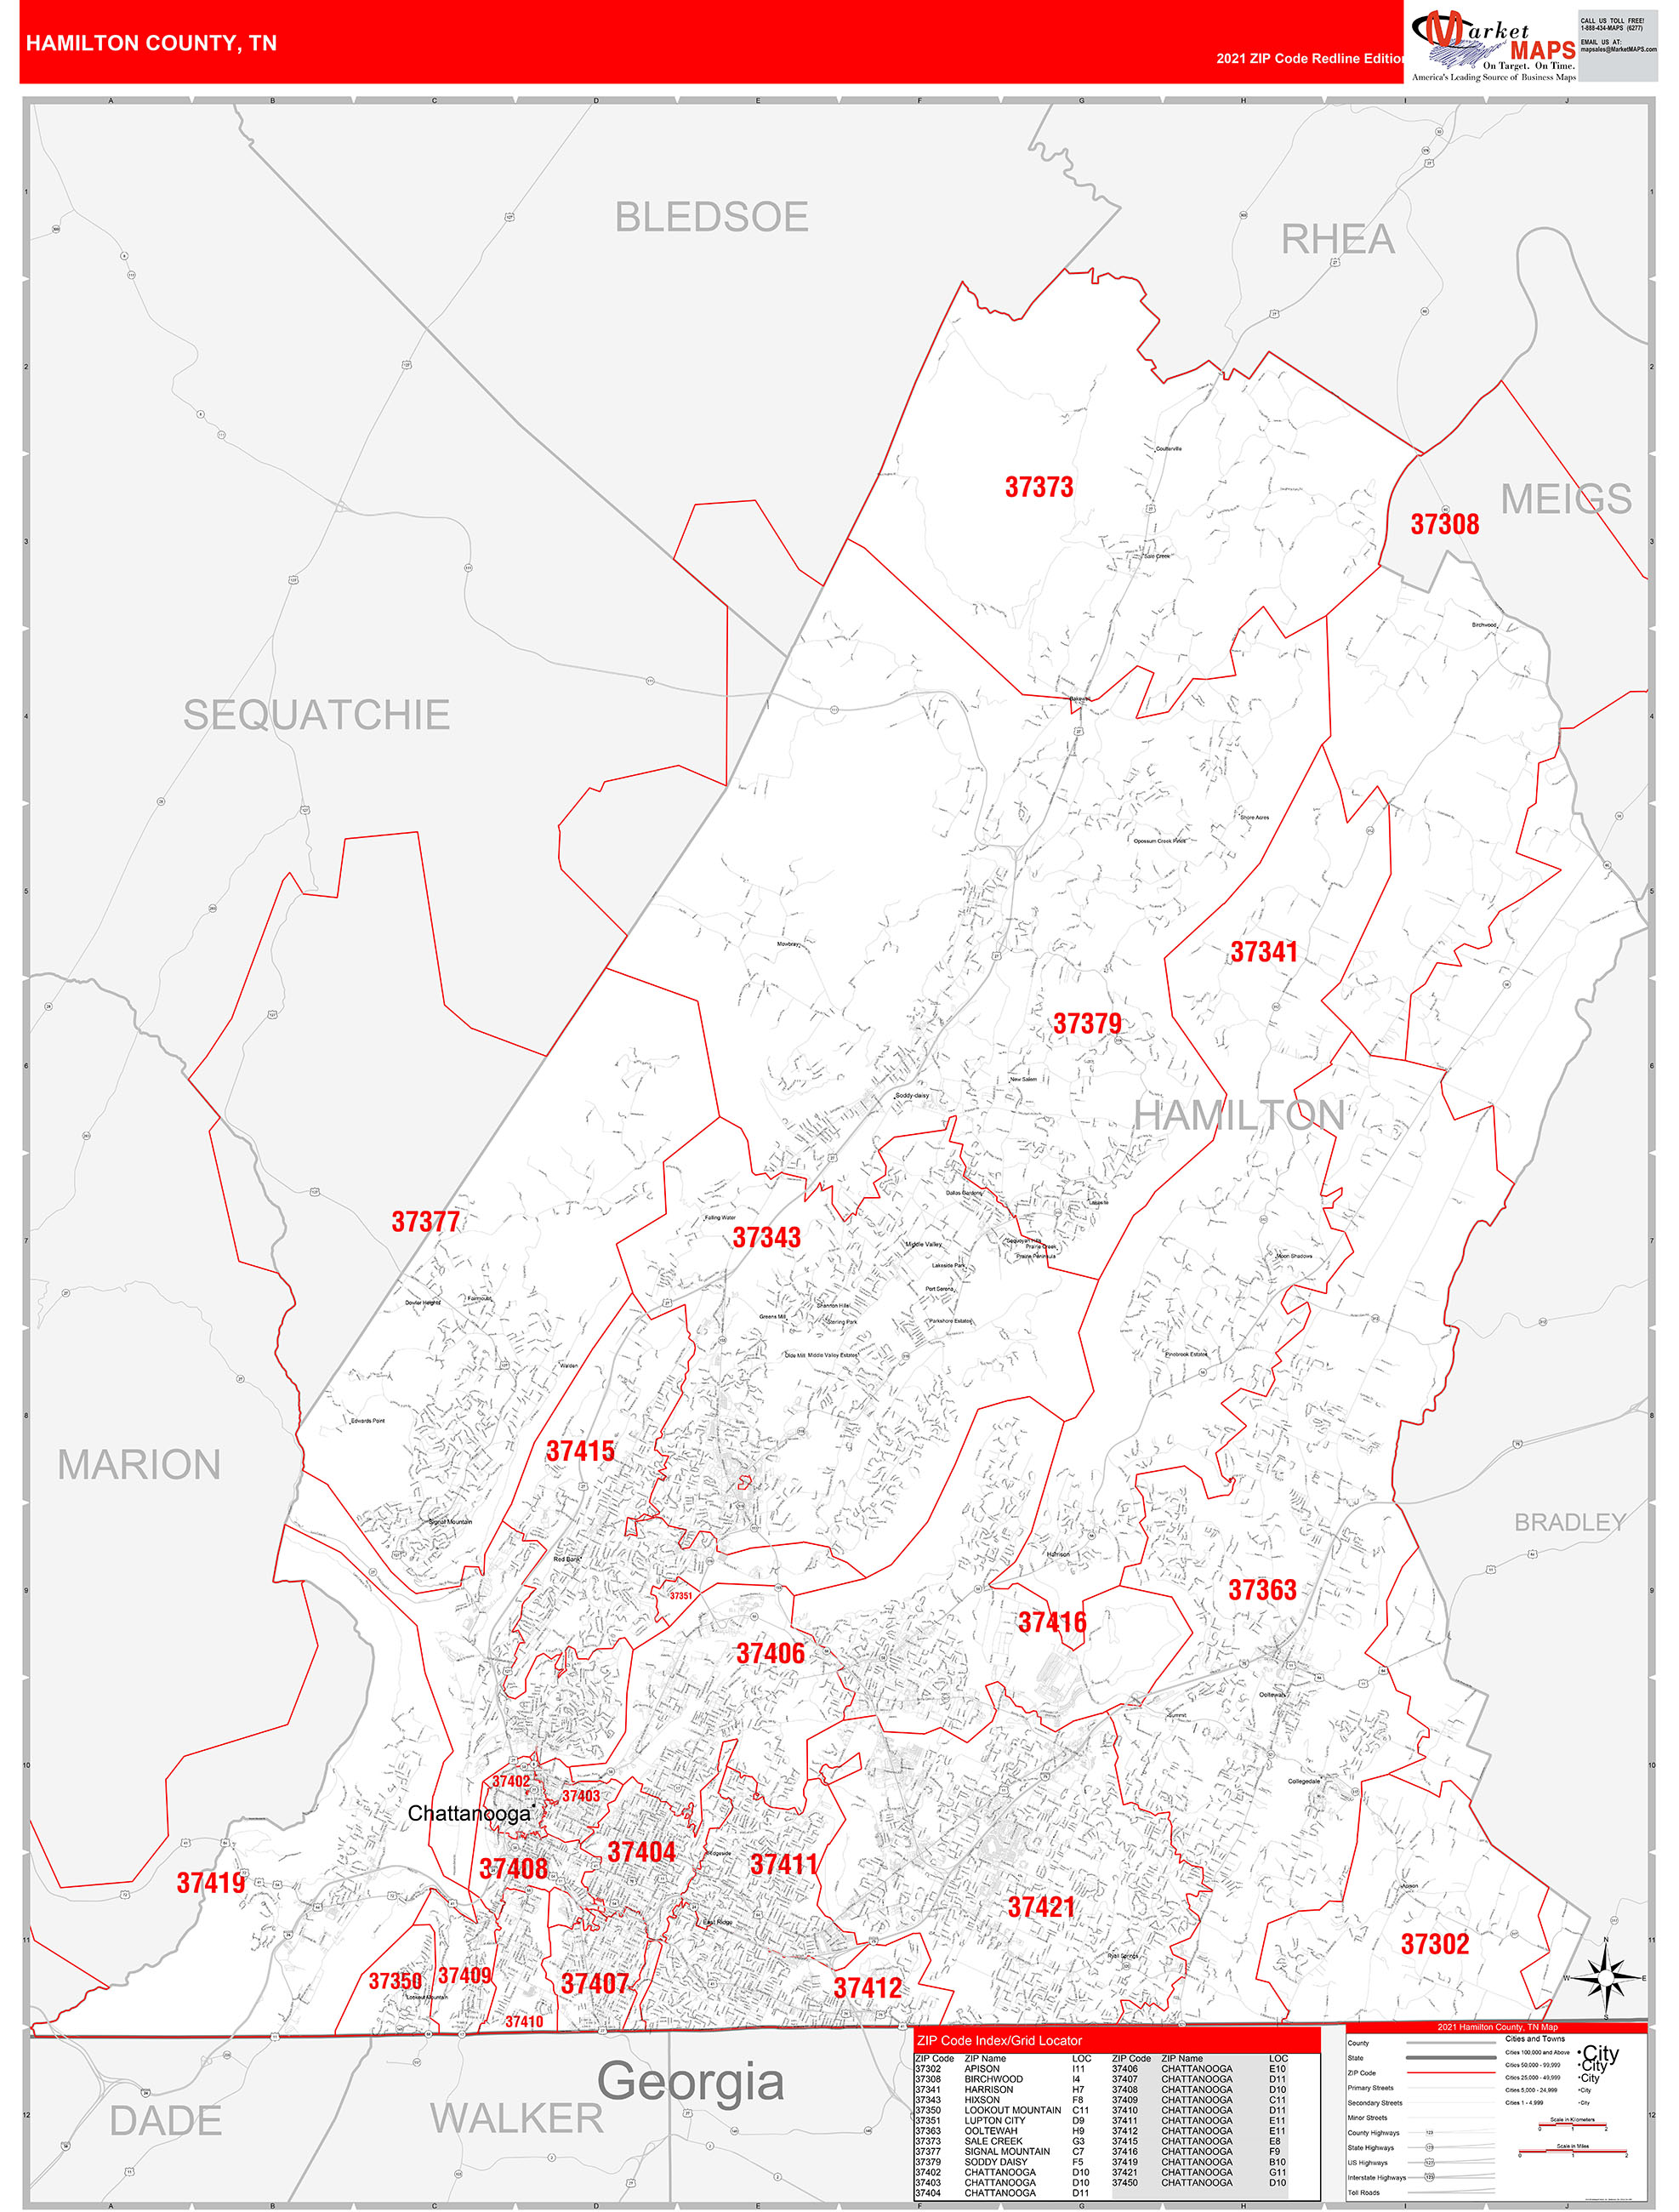 hamilton-county-tn-zip-code-wall-map-red-line-style-by-marketmaps